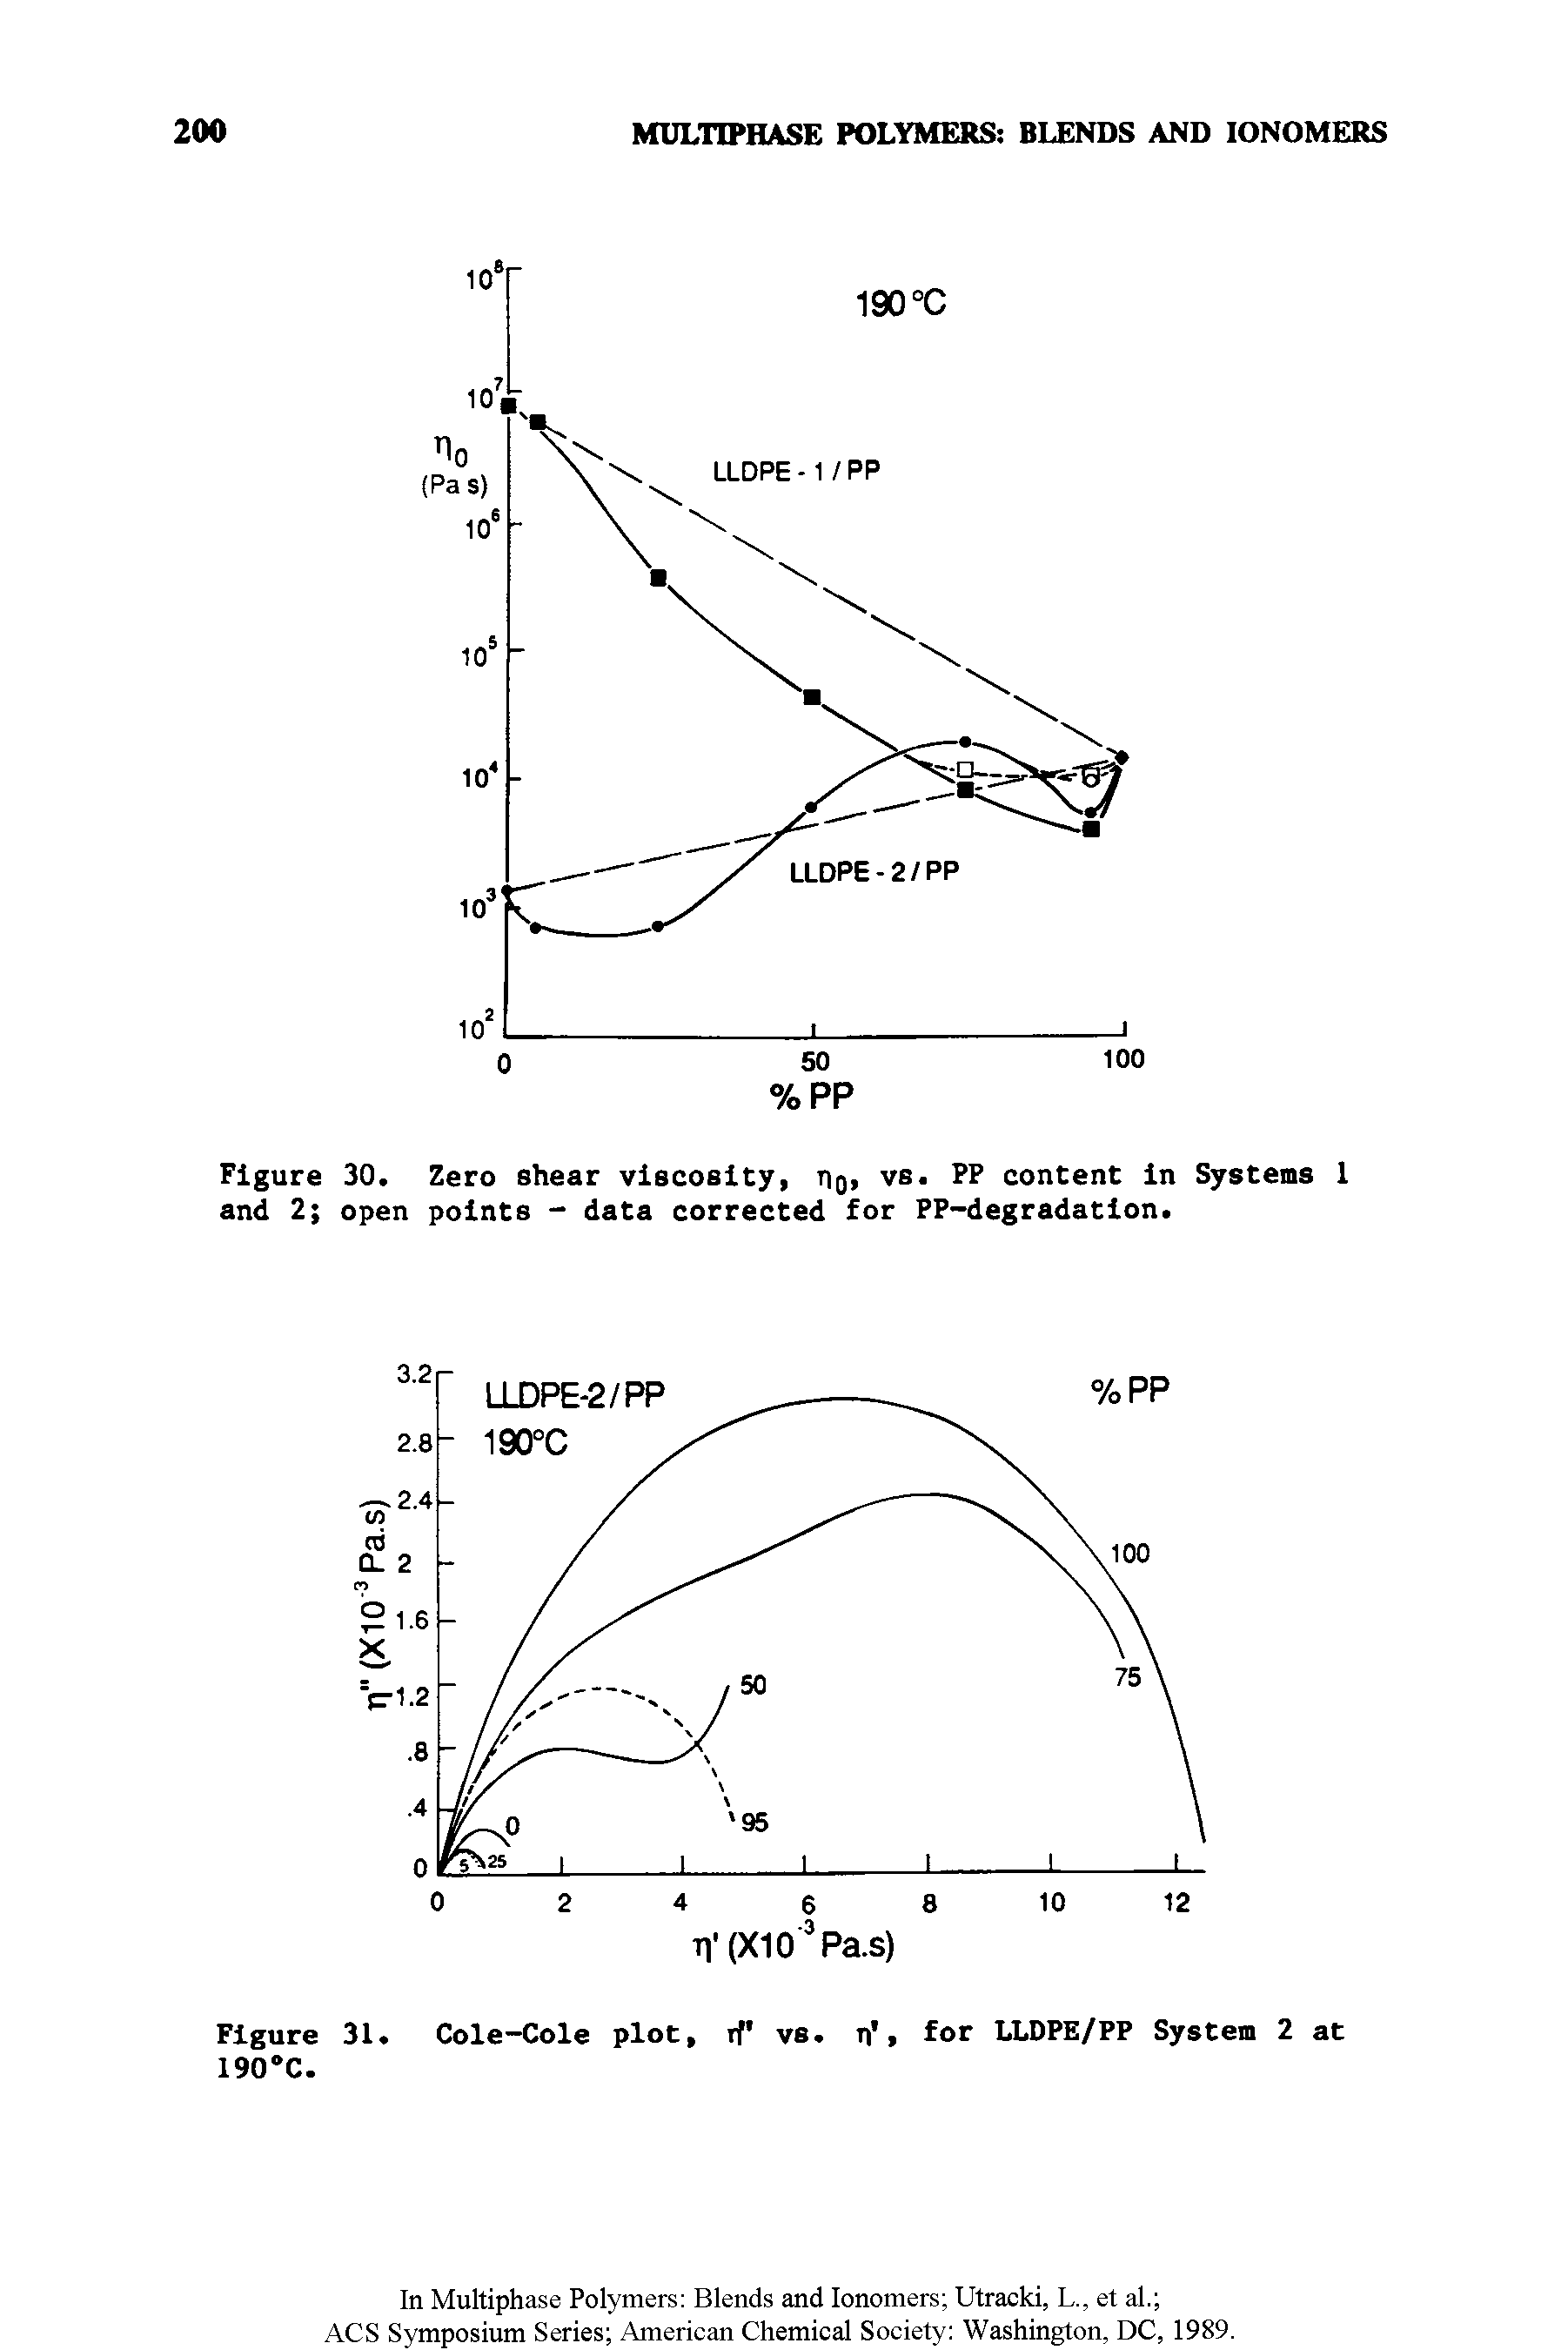 Figure 31. Cole-Cole plot, rf vs. n, for LLDPE/PP System 2 at 190 C.